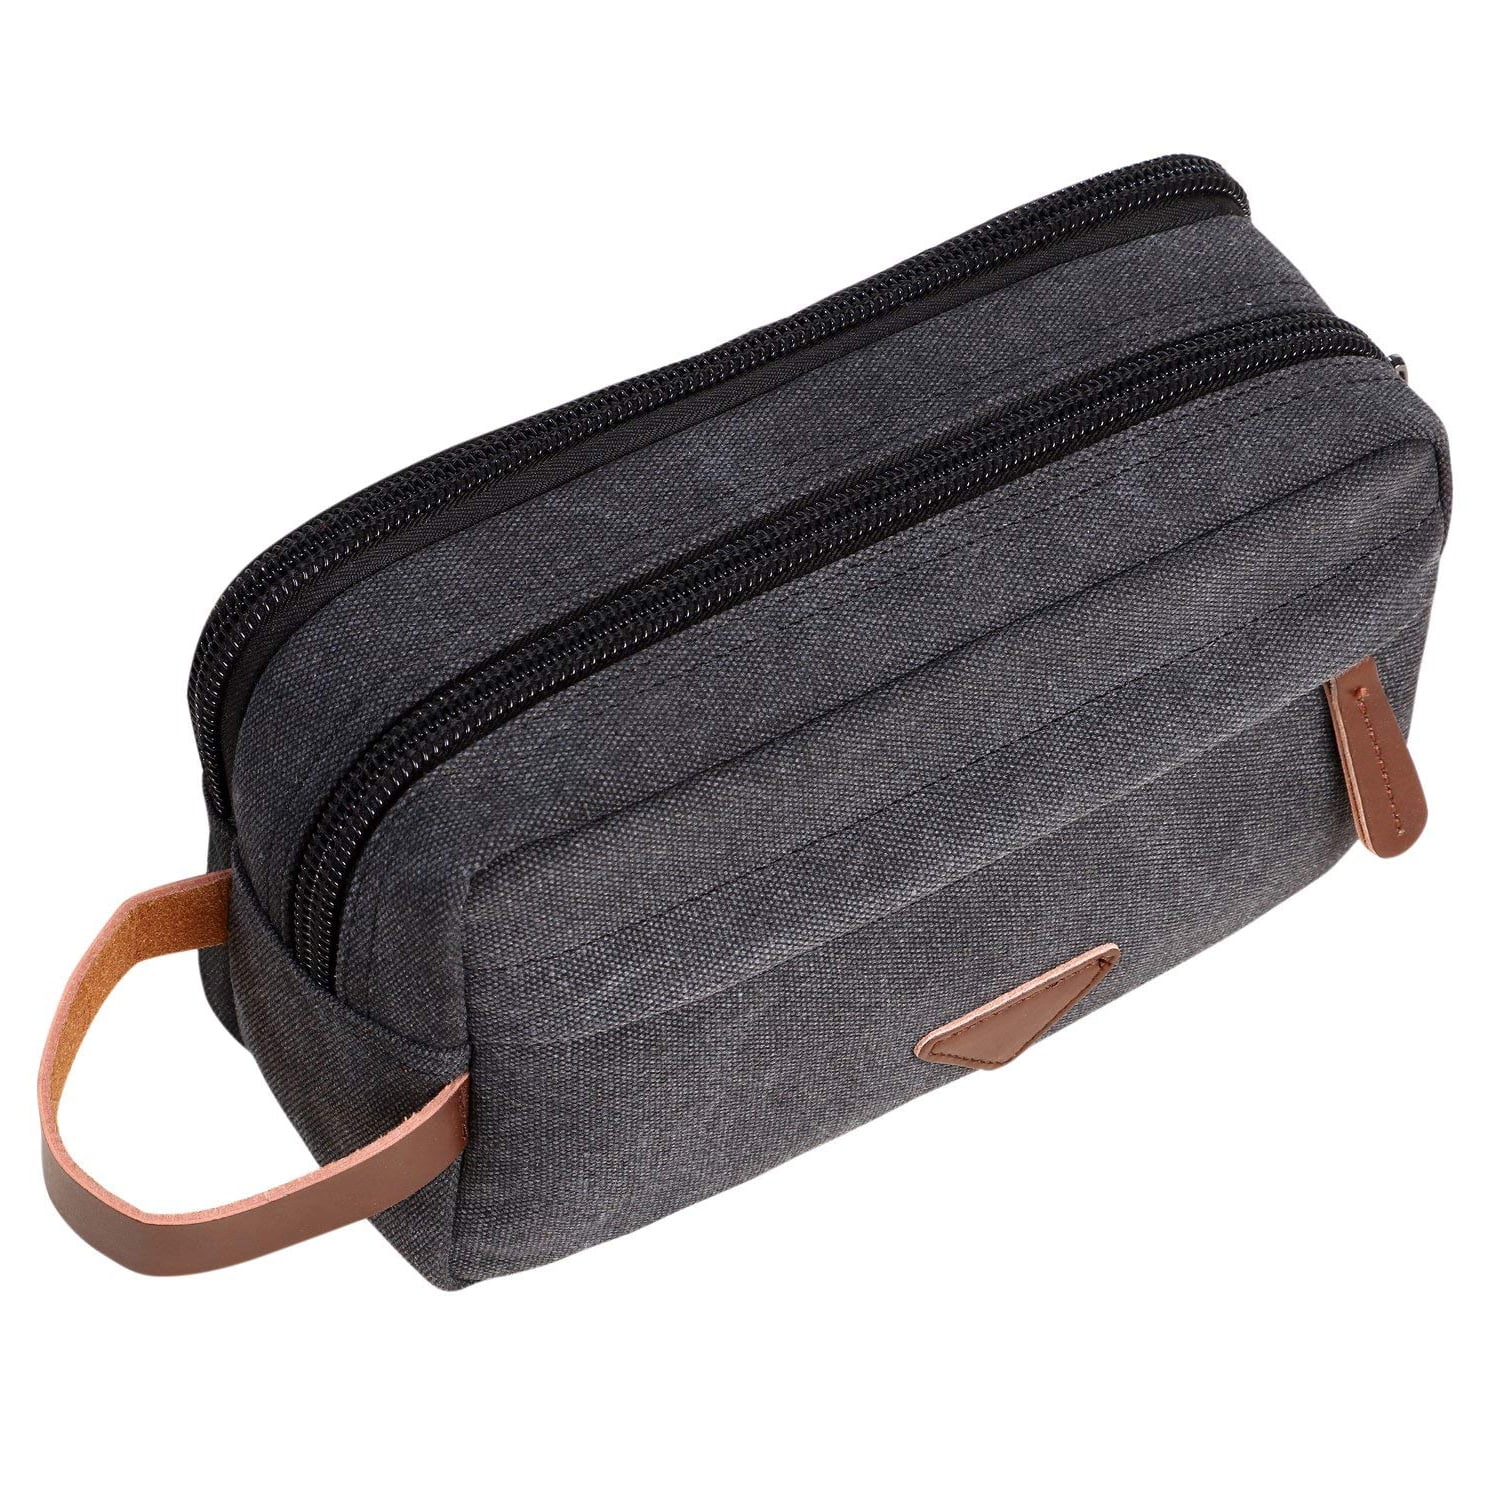 Toiletry Bag Travel Canvas Mens Leather Makeup Bag Organizer Cosmetic ...